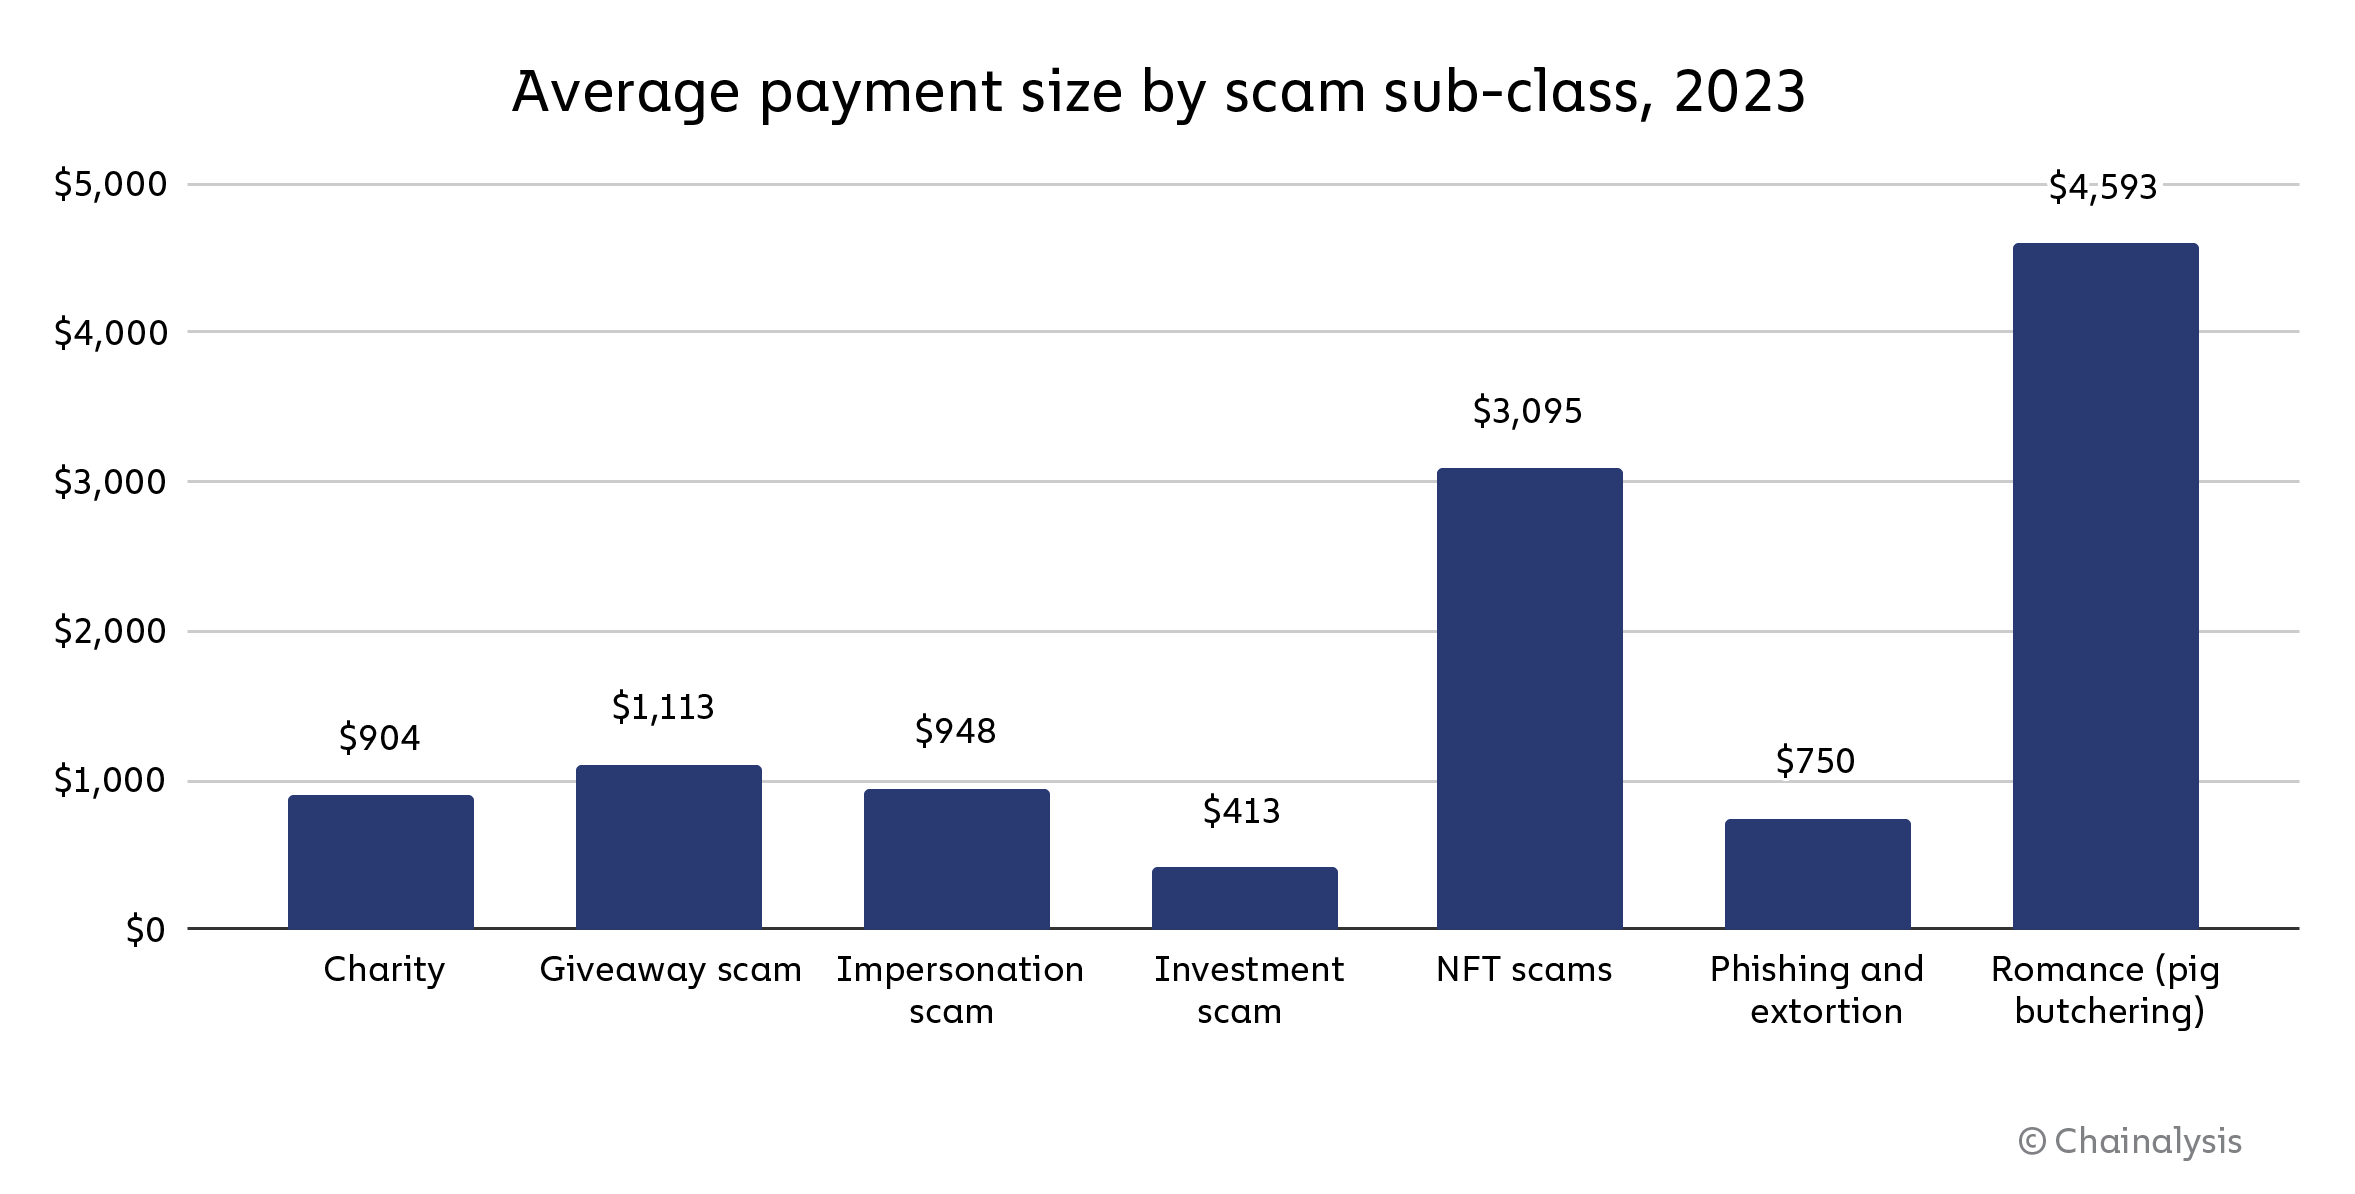 Crypto crime looks set to decline in 2023 as 'romance' digital asset scams increase 85x since 2020: Chainalysis